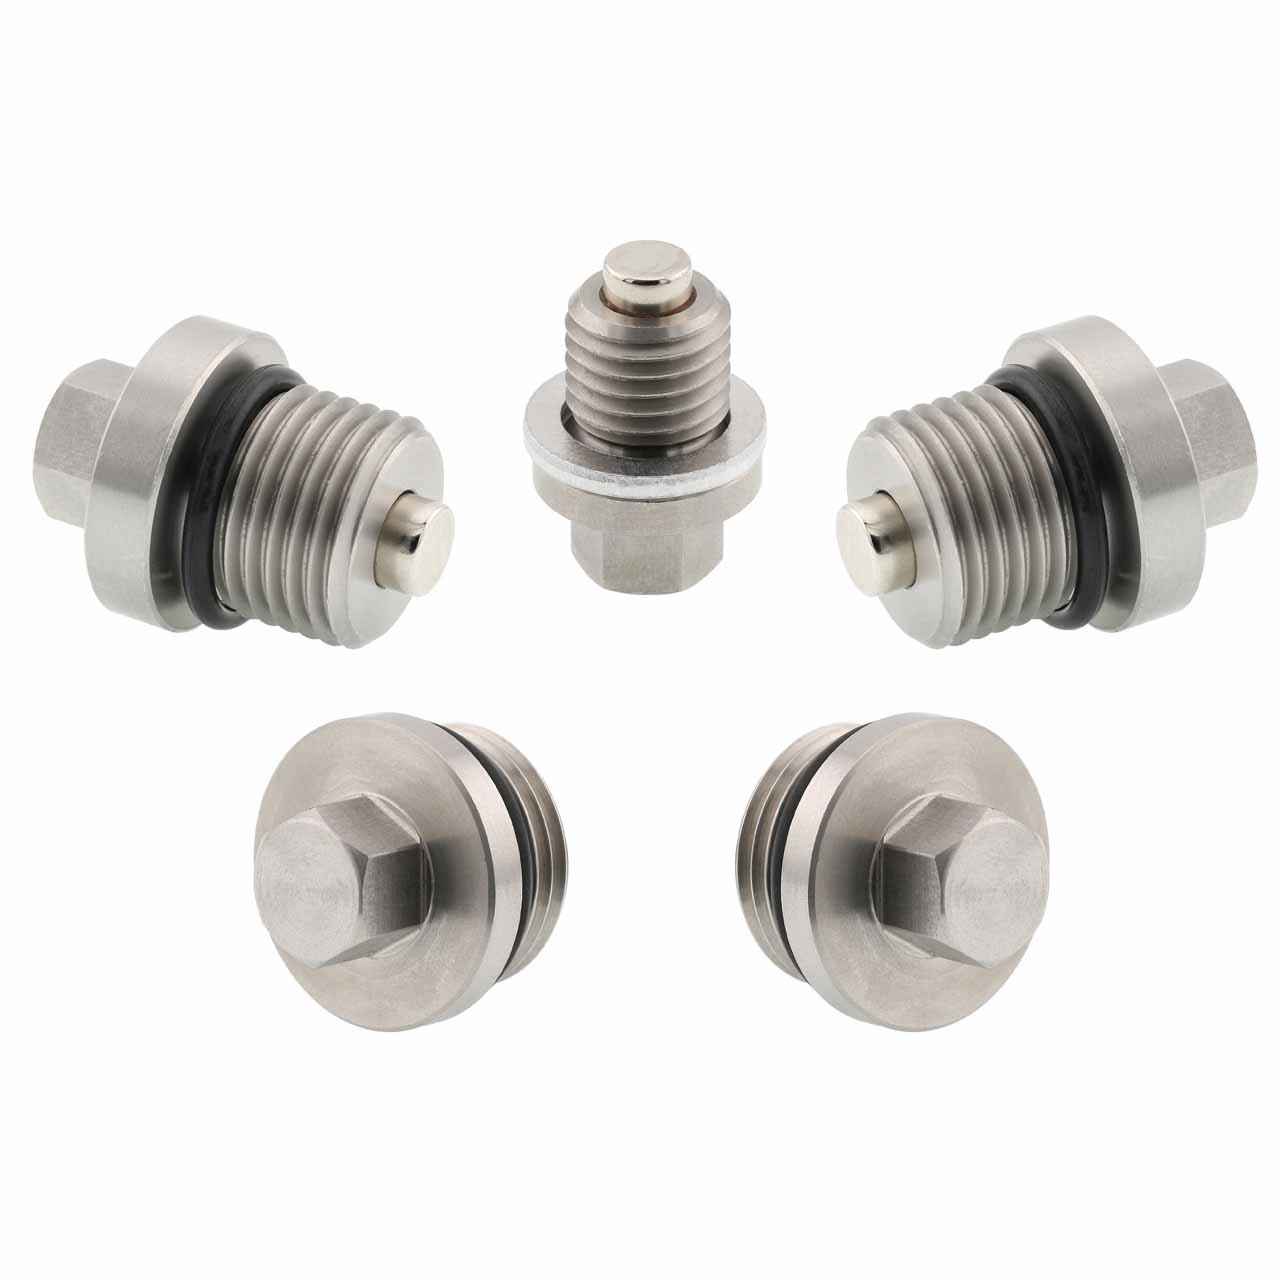 Polaris RZR XP 1000 Magnetic Oil Drain Plug Kit - 2020-2023 - Engine, Transmission, Differential - Made In USA